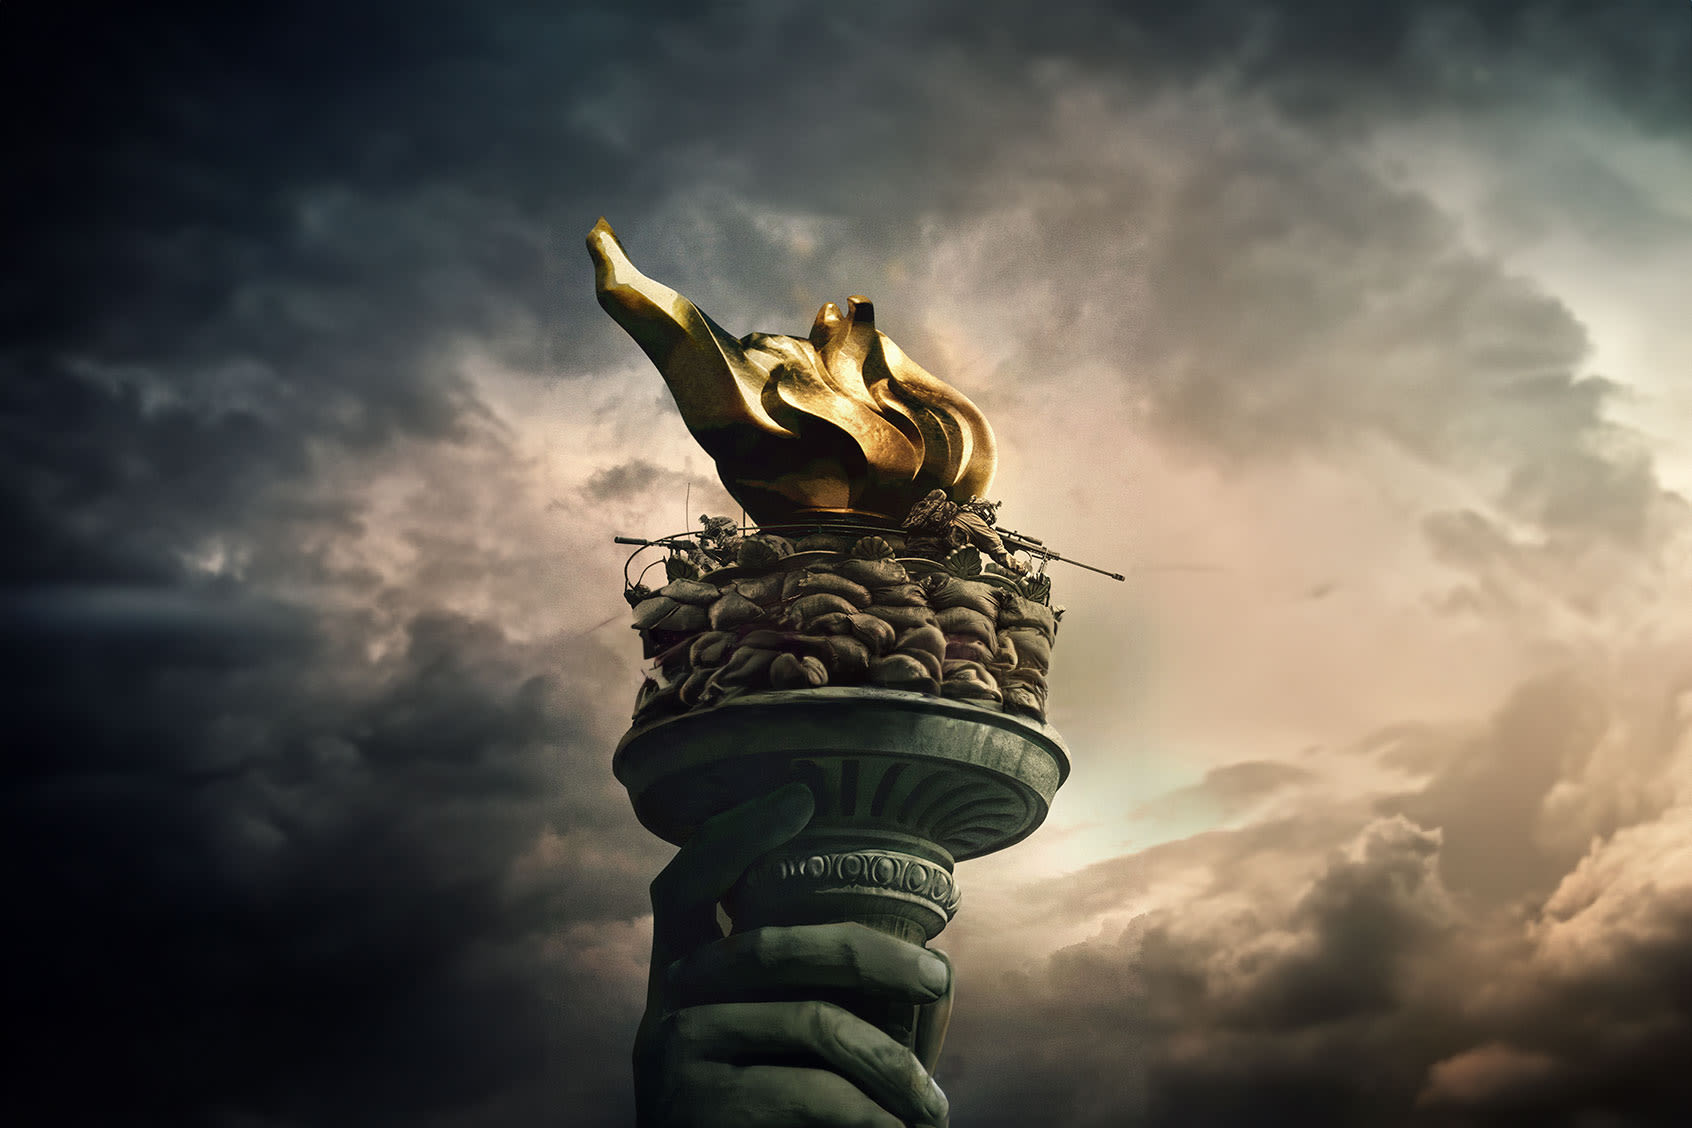 A history of the Statue of Liberty getting destroyed or distorted in movie posters